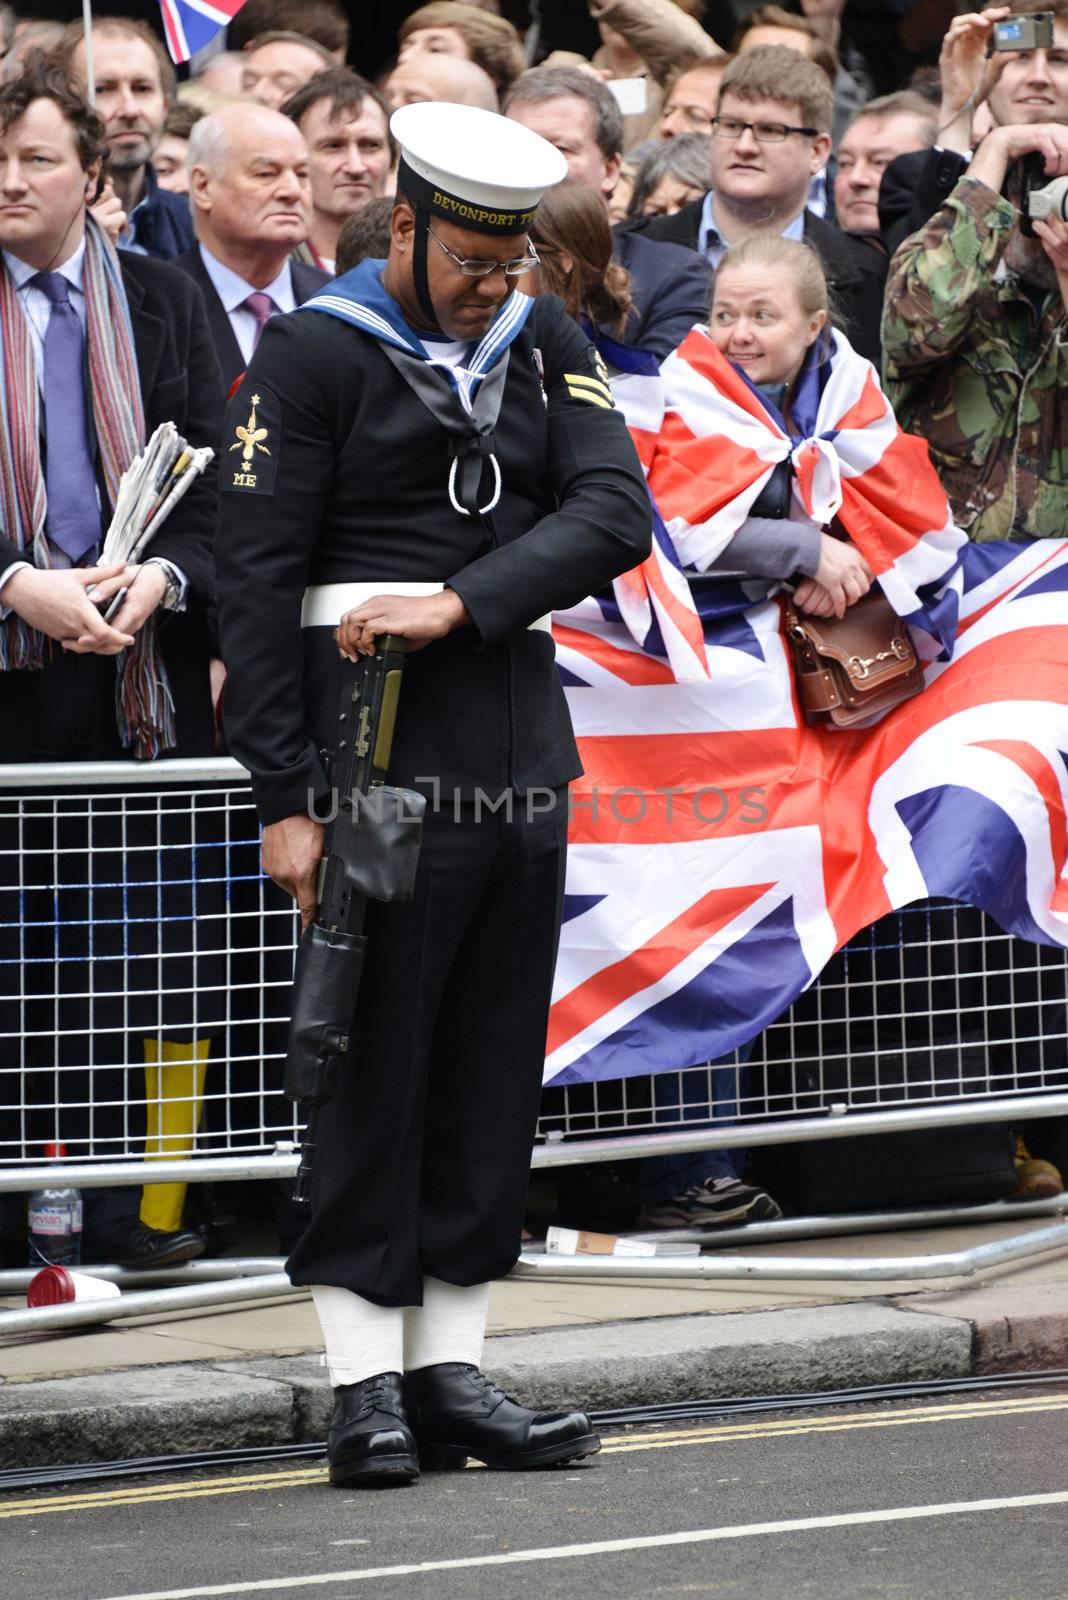 London, UK. April 17th, 2013. Soldier lining Baroness Thatcher procession route on Ludgate Hill.